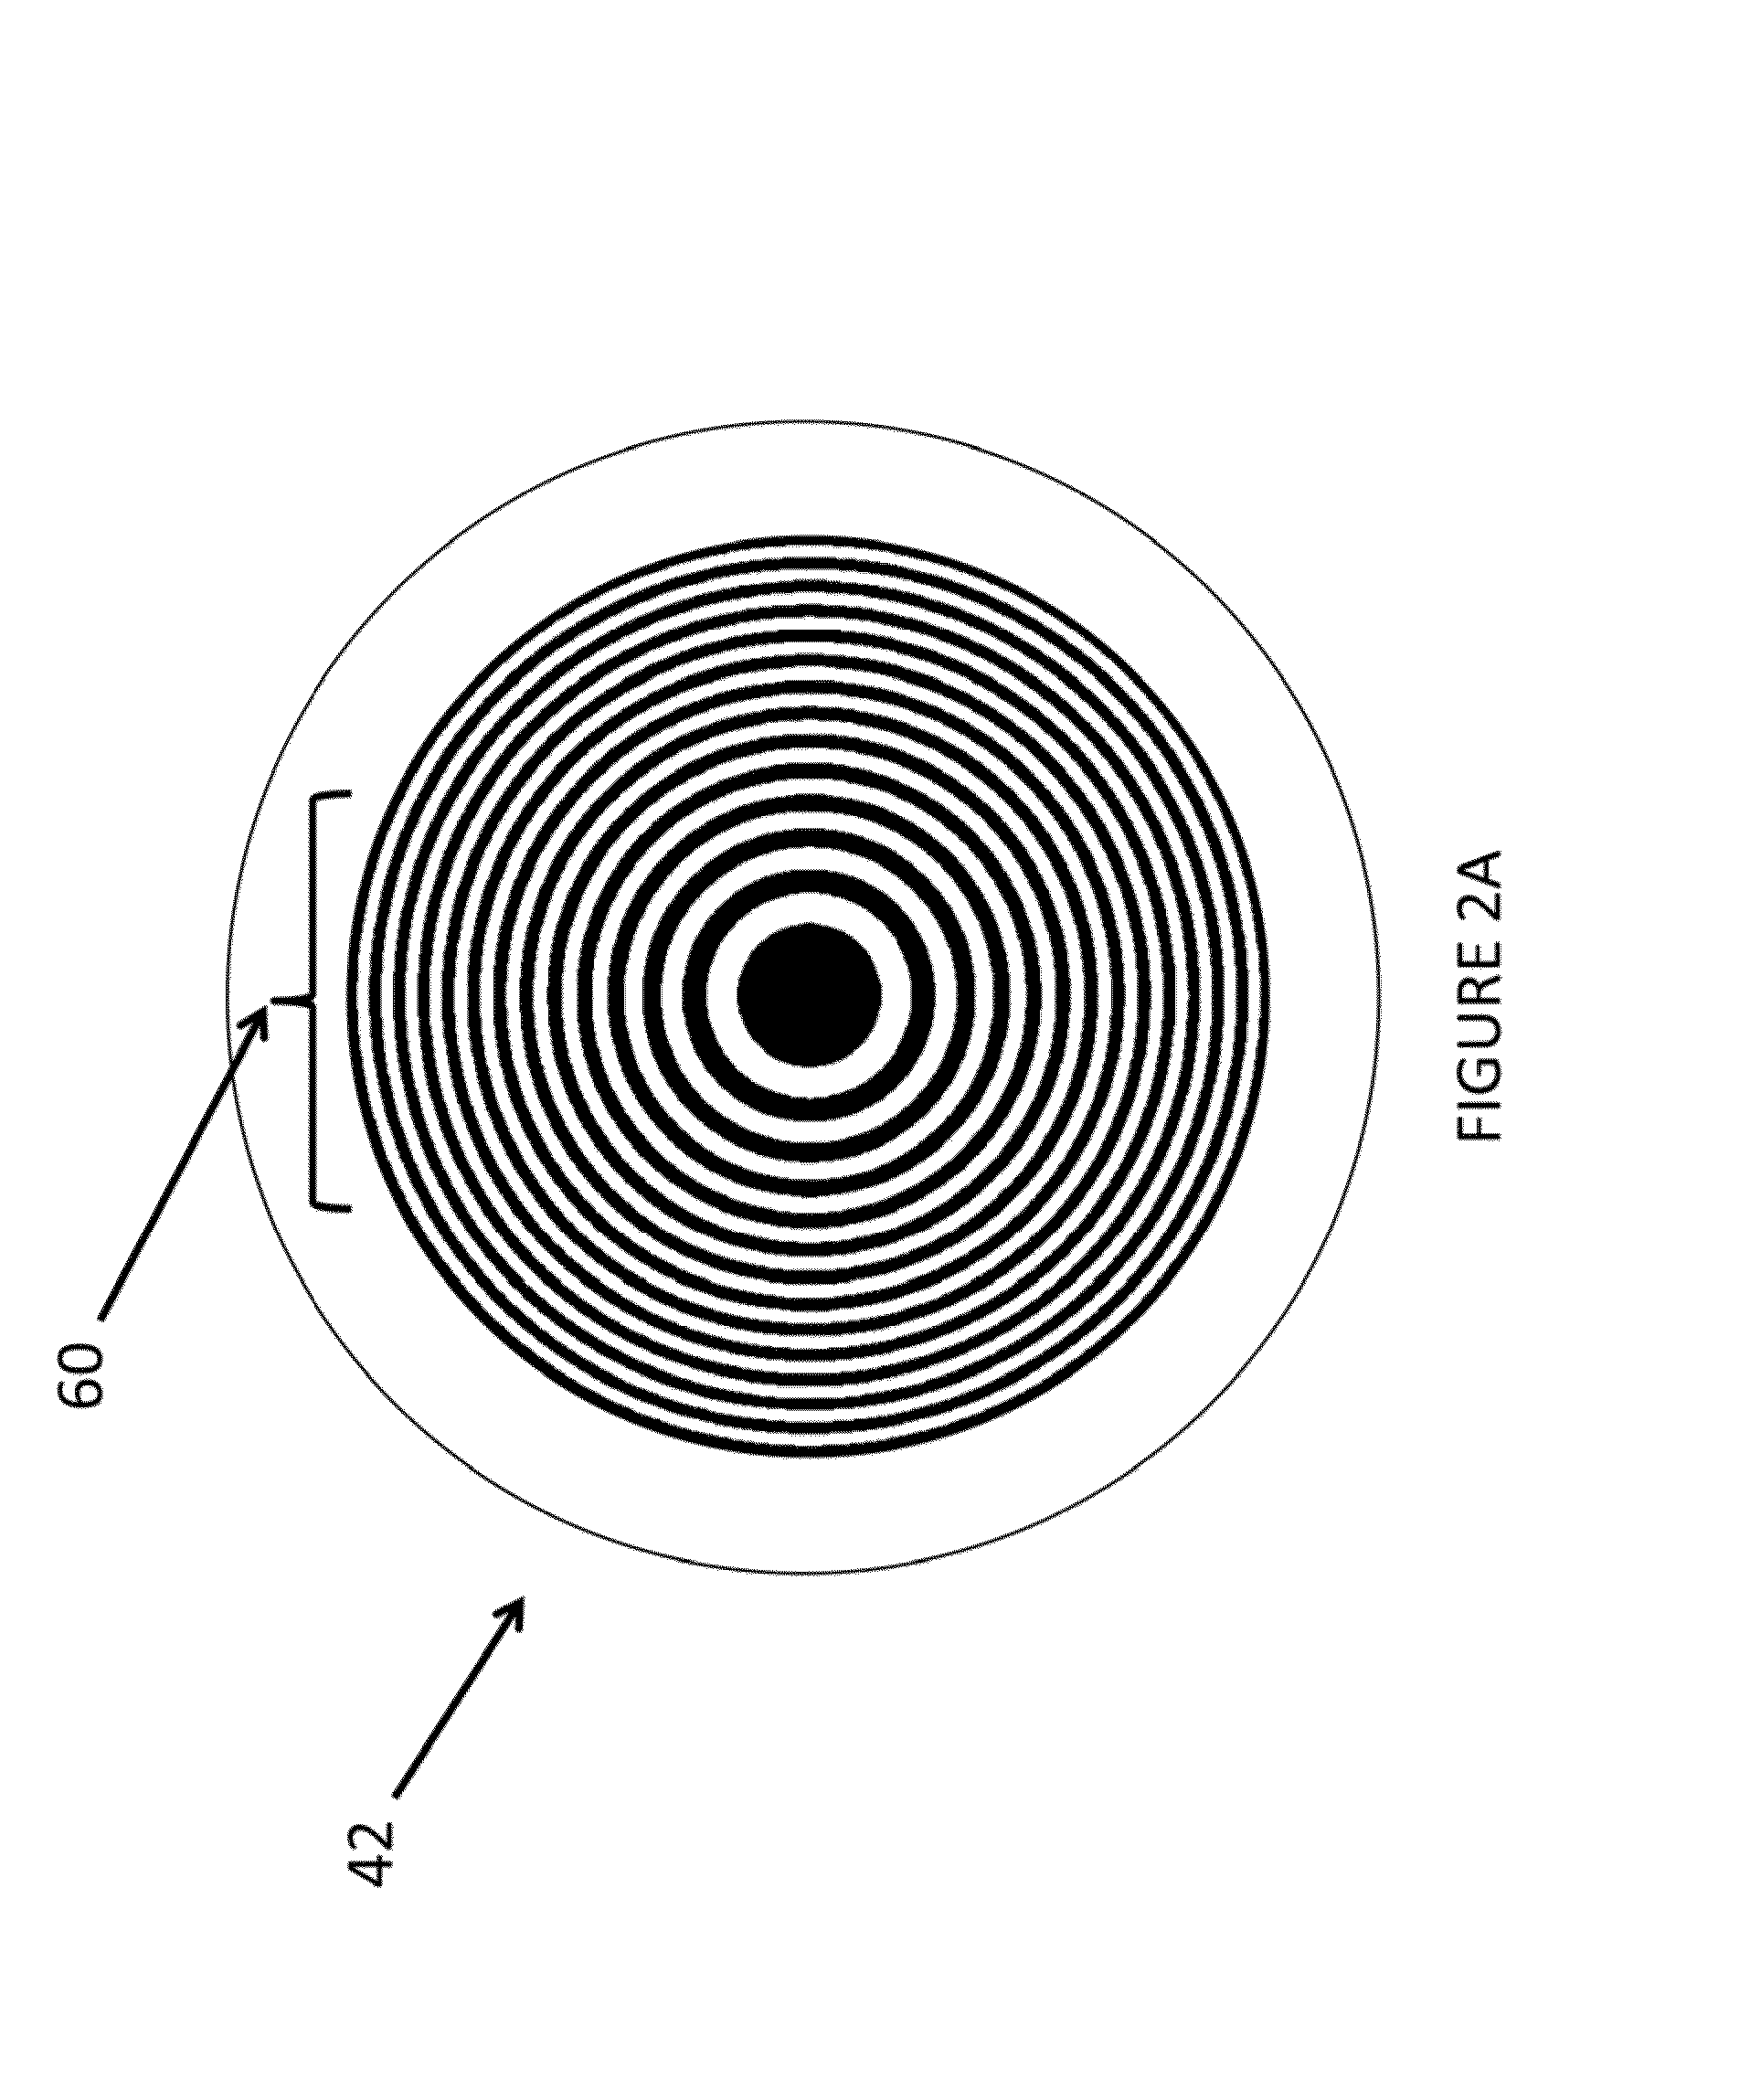 Acoustic fresnel zone plate lens for aqueous environments and methods of using same